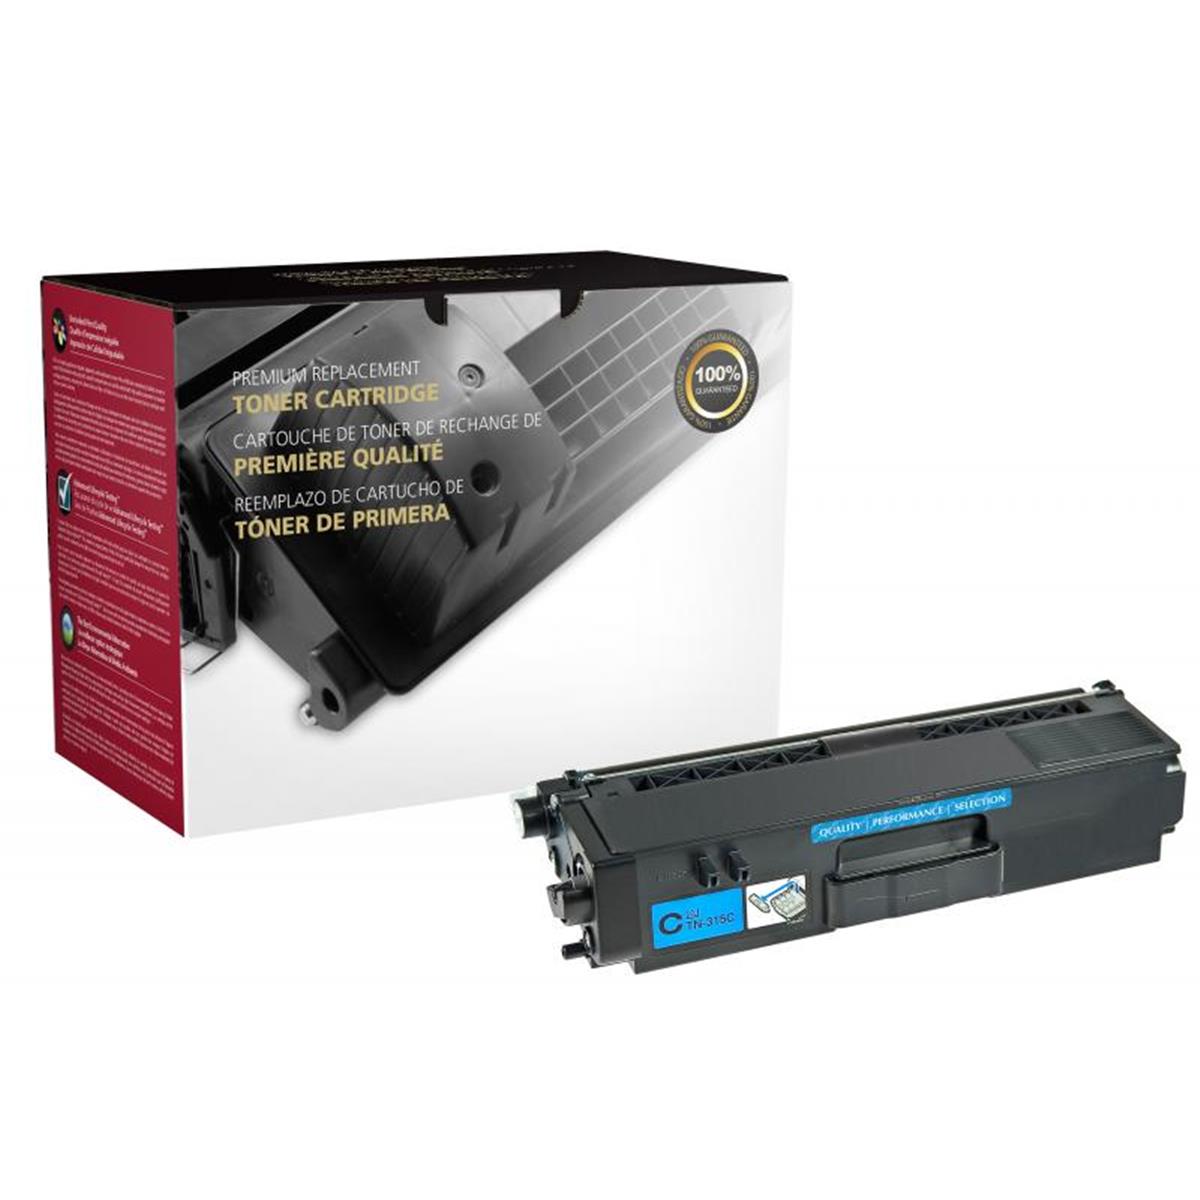 Picture of Brother 200445 High Yield Cyan Toner Cartridge for TN315